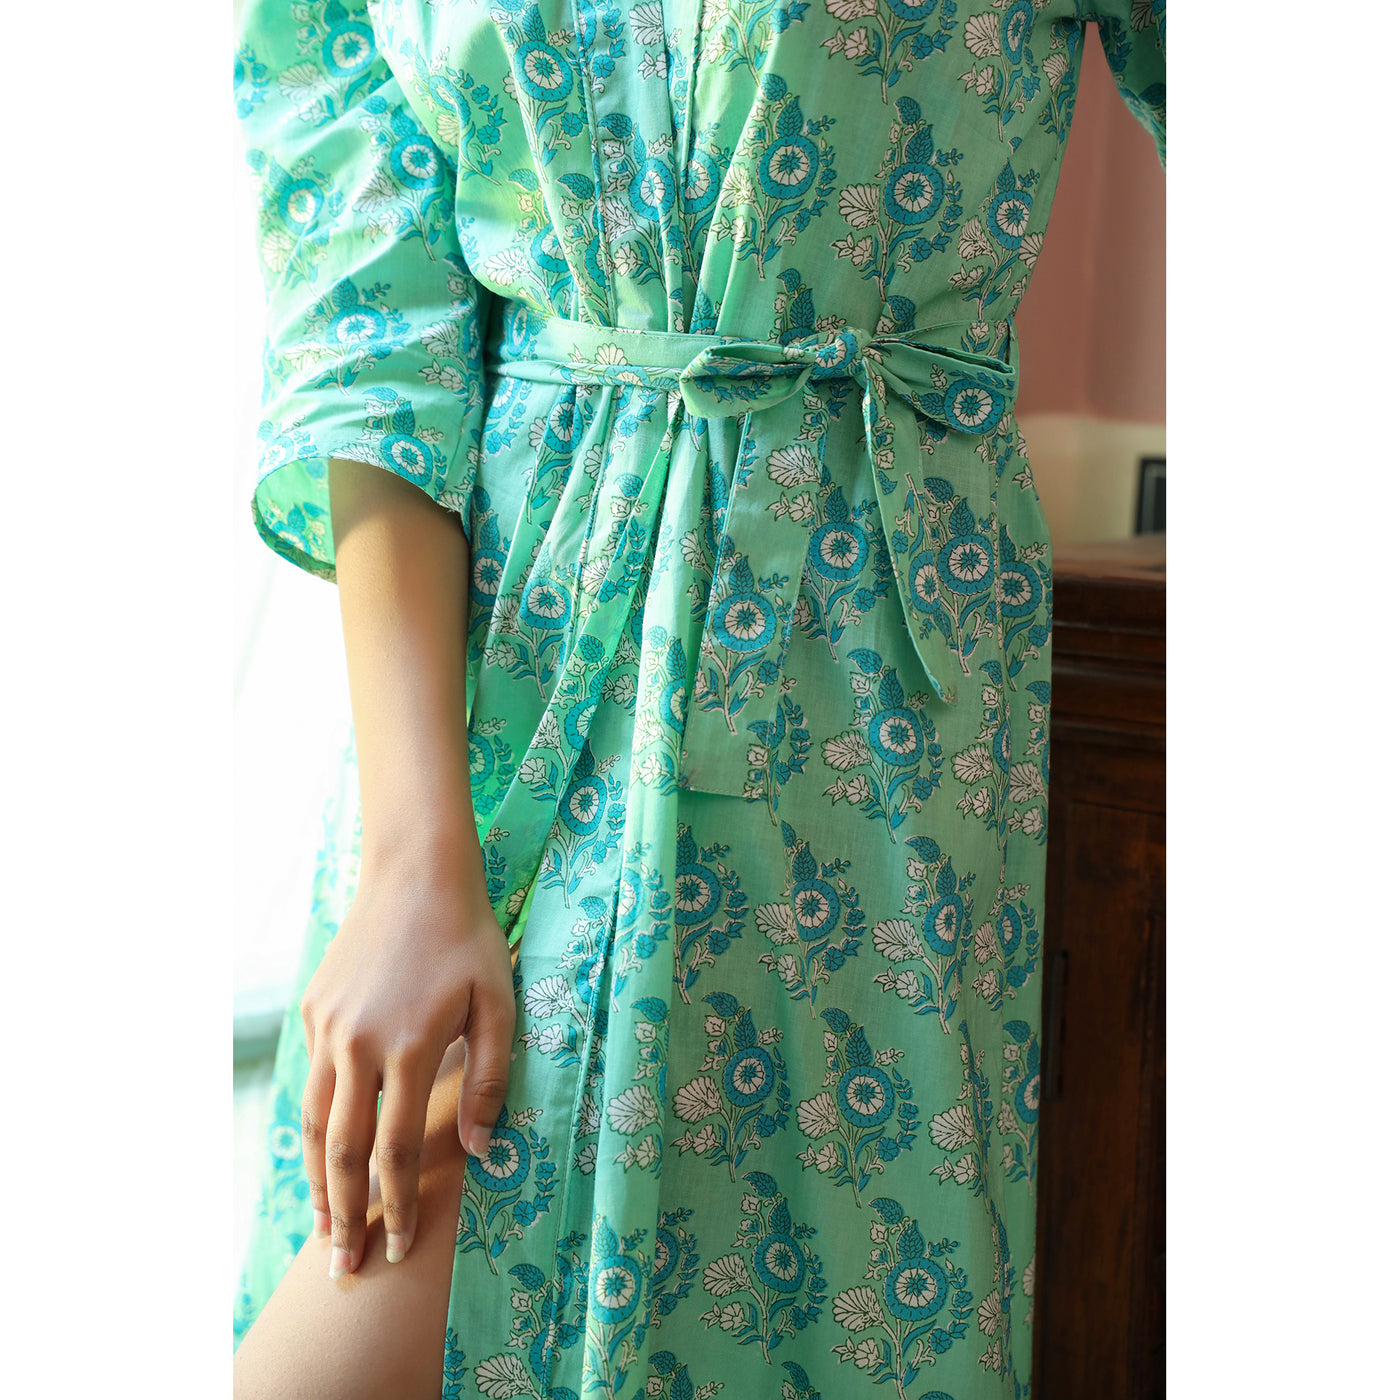 Floral Motifs on Turquoise Robe